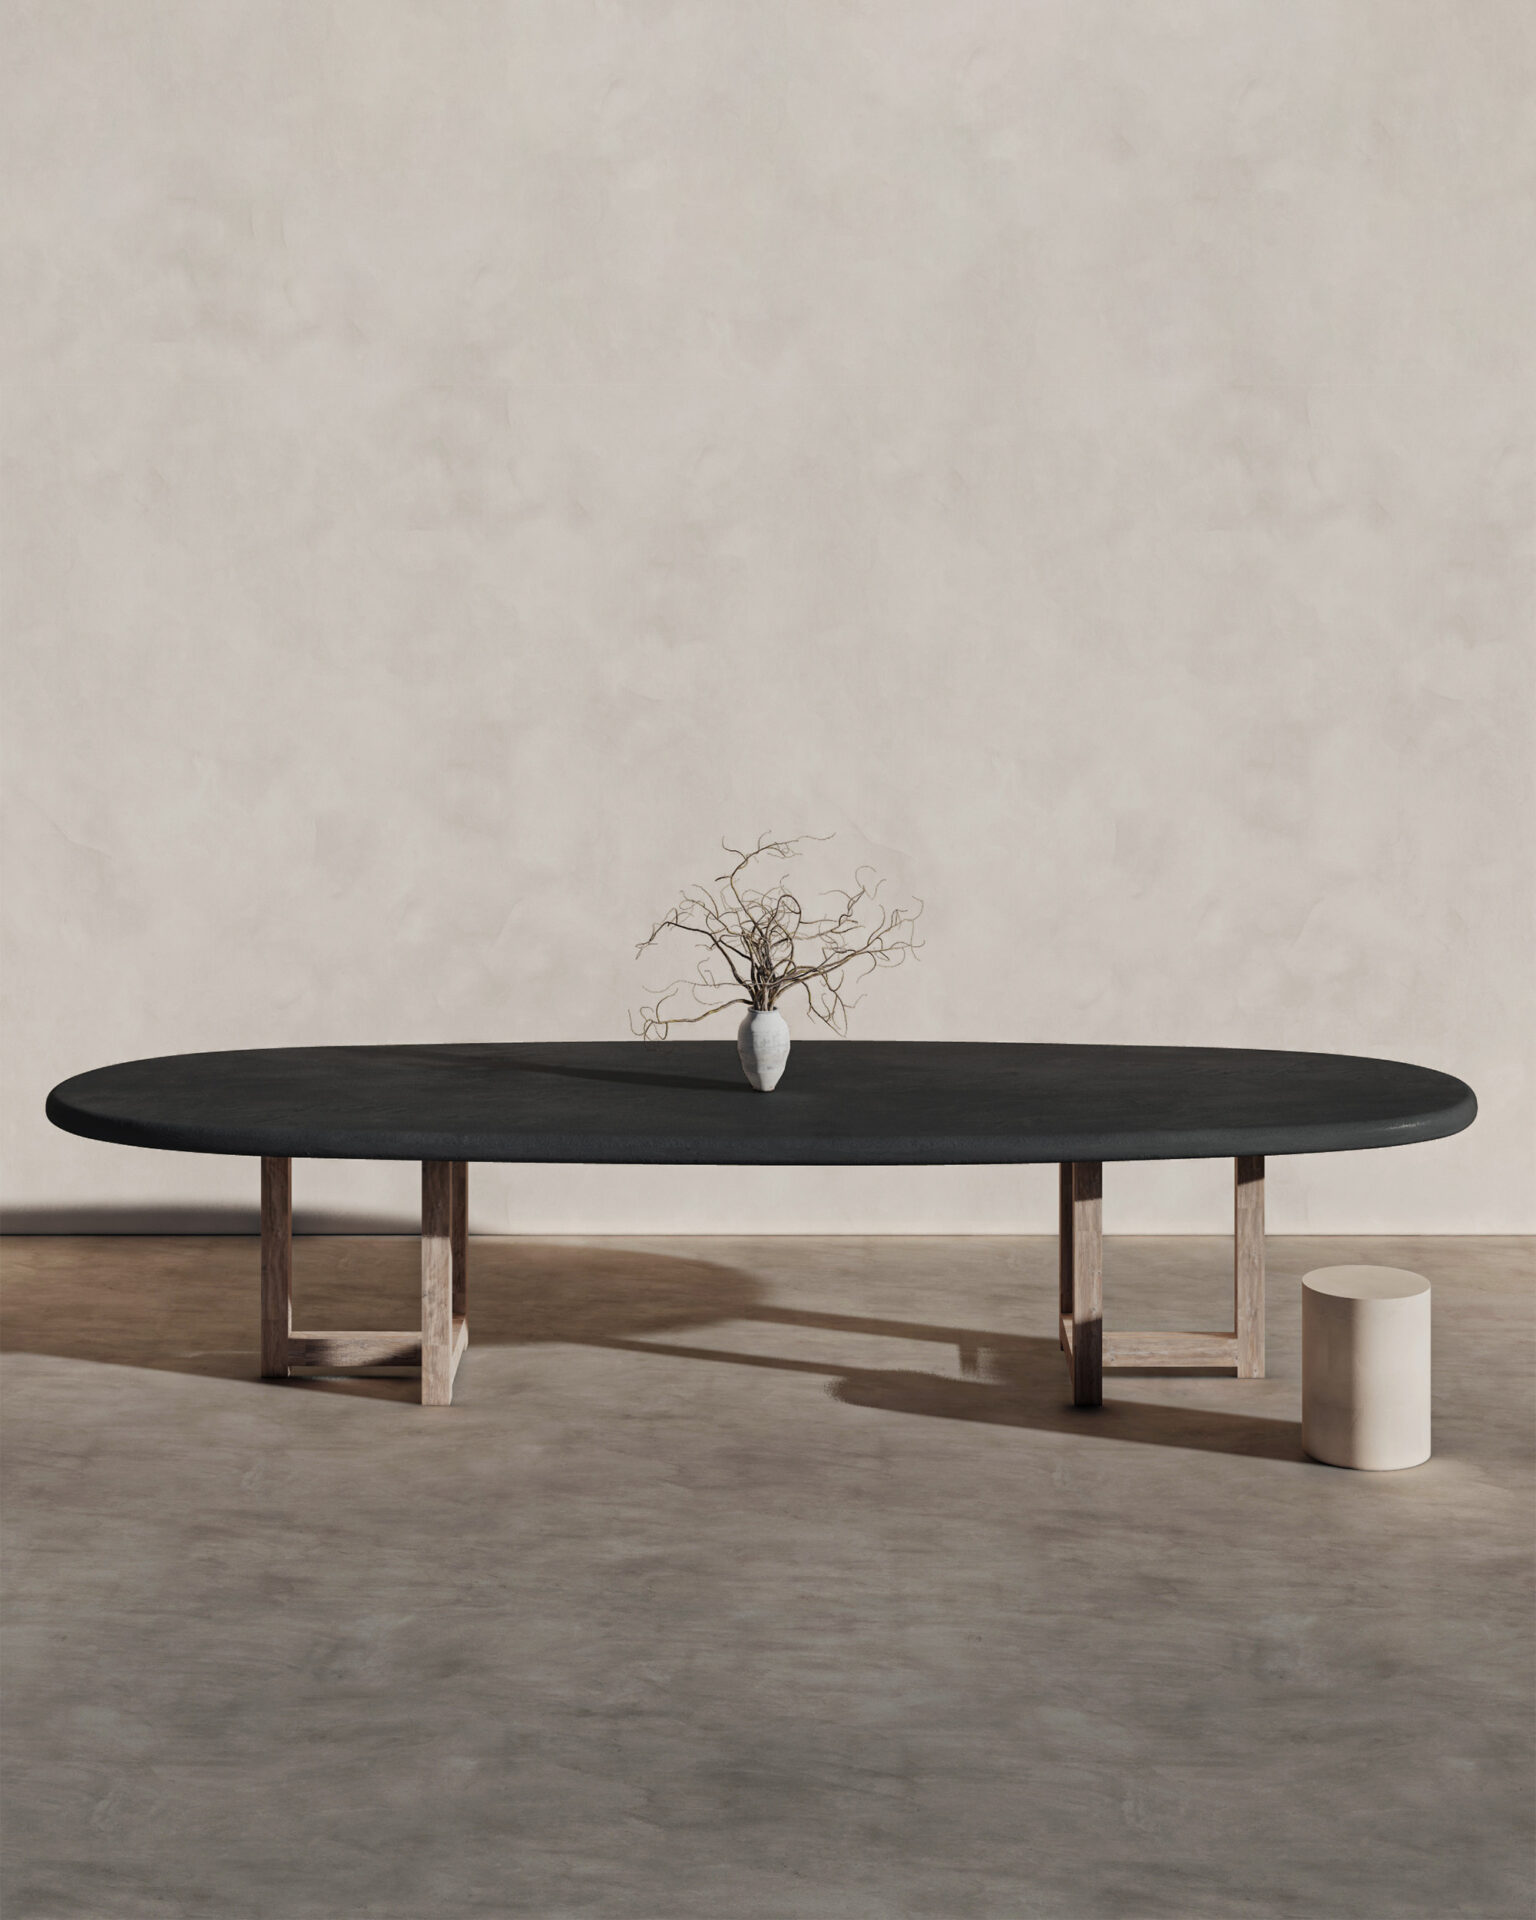 Studio Straf_Oval Dining Table Long with Wooden Legs_Case Goods_Studio Fenice_(1)